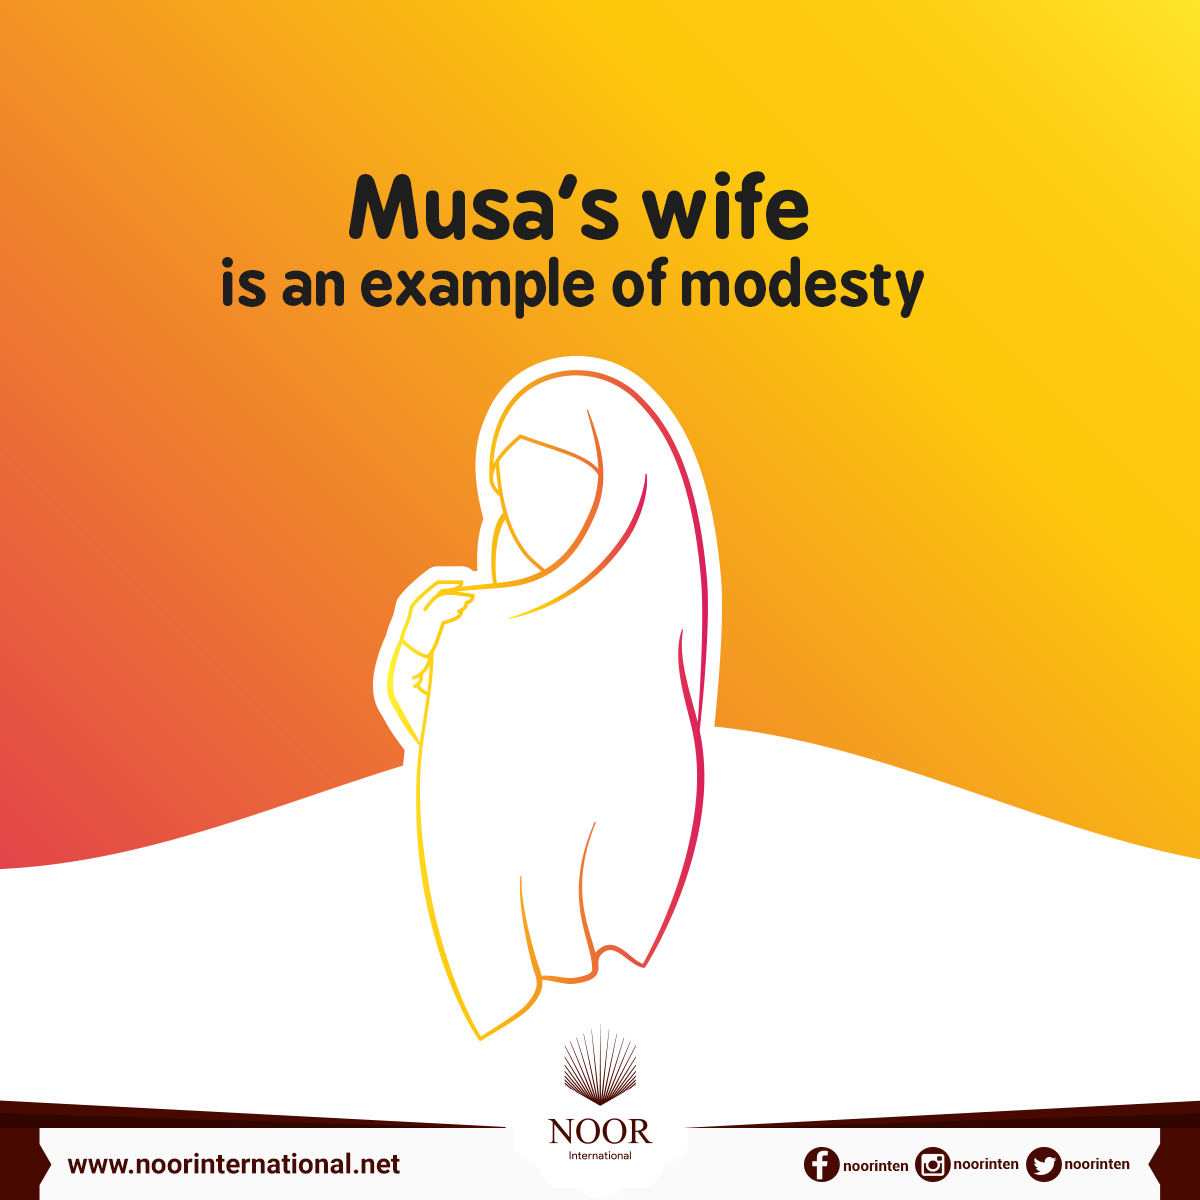 Musa's wife is an example of modesty